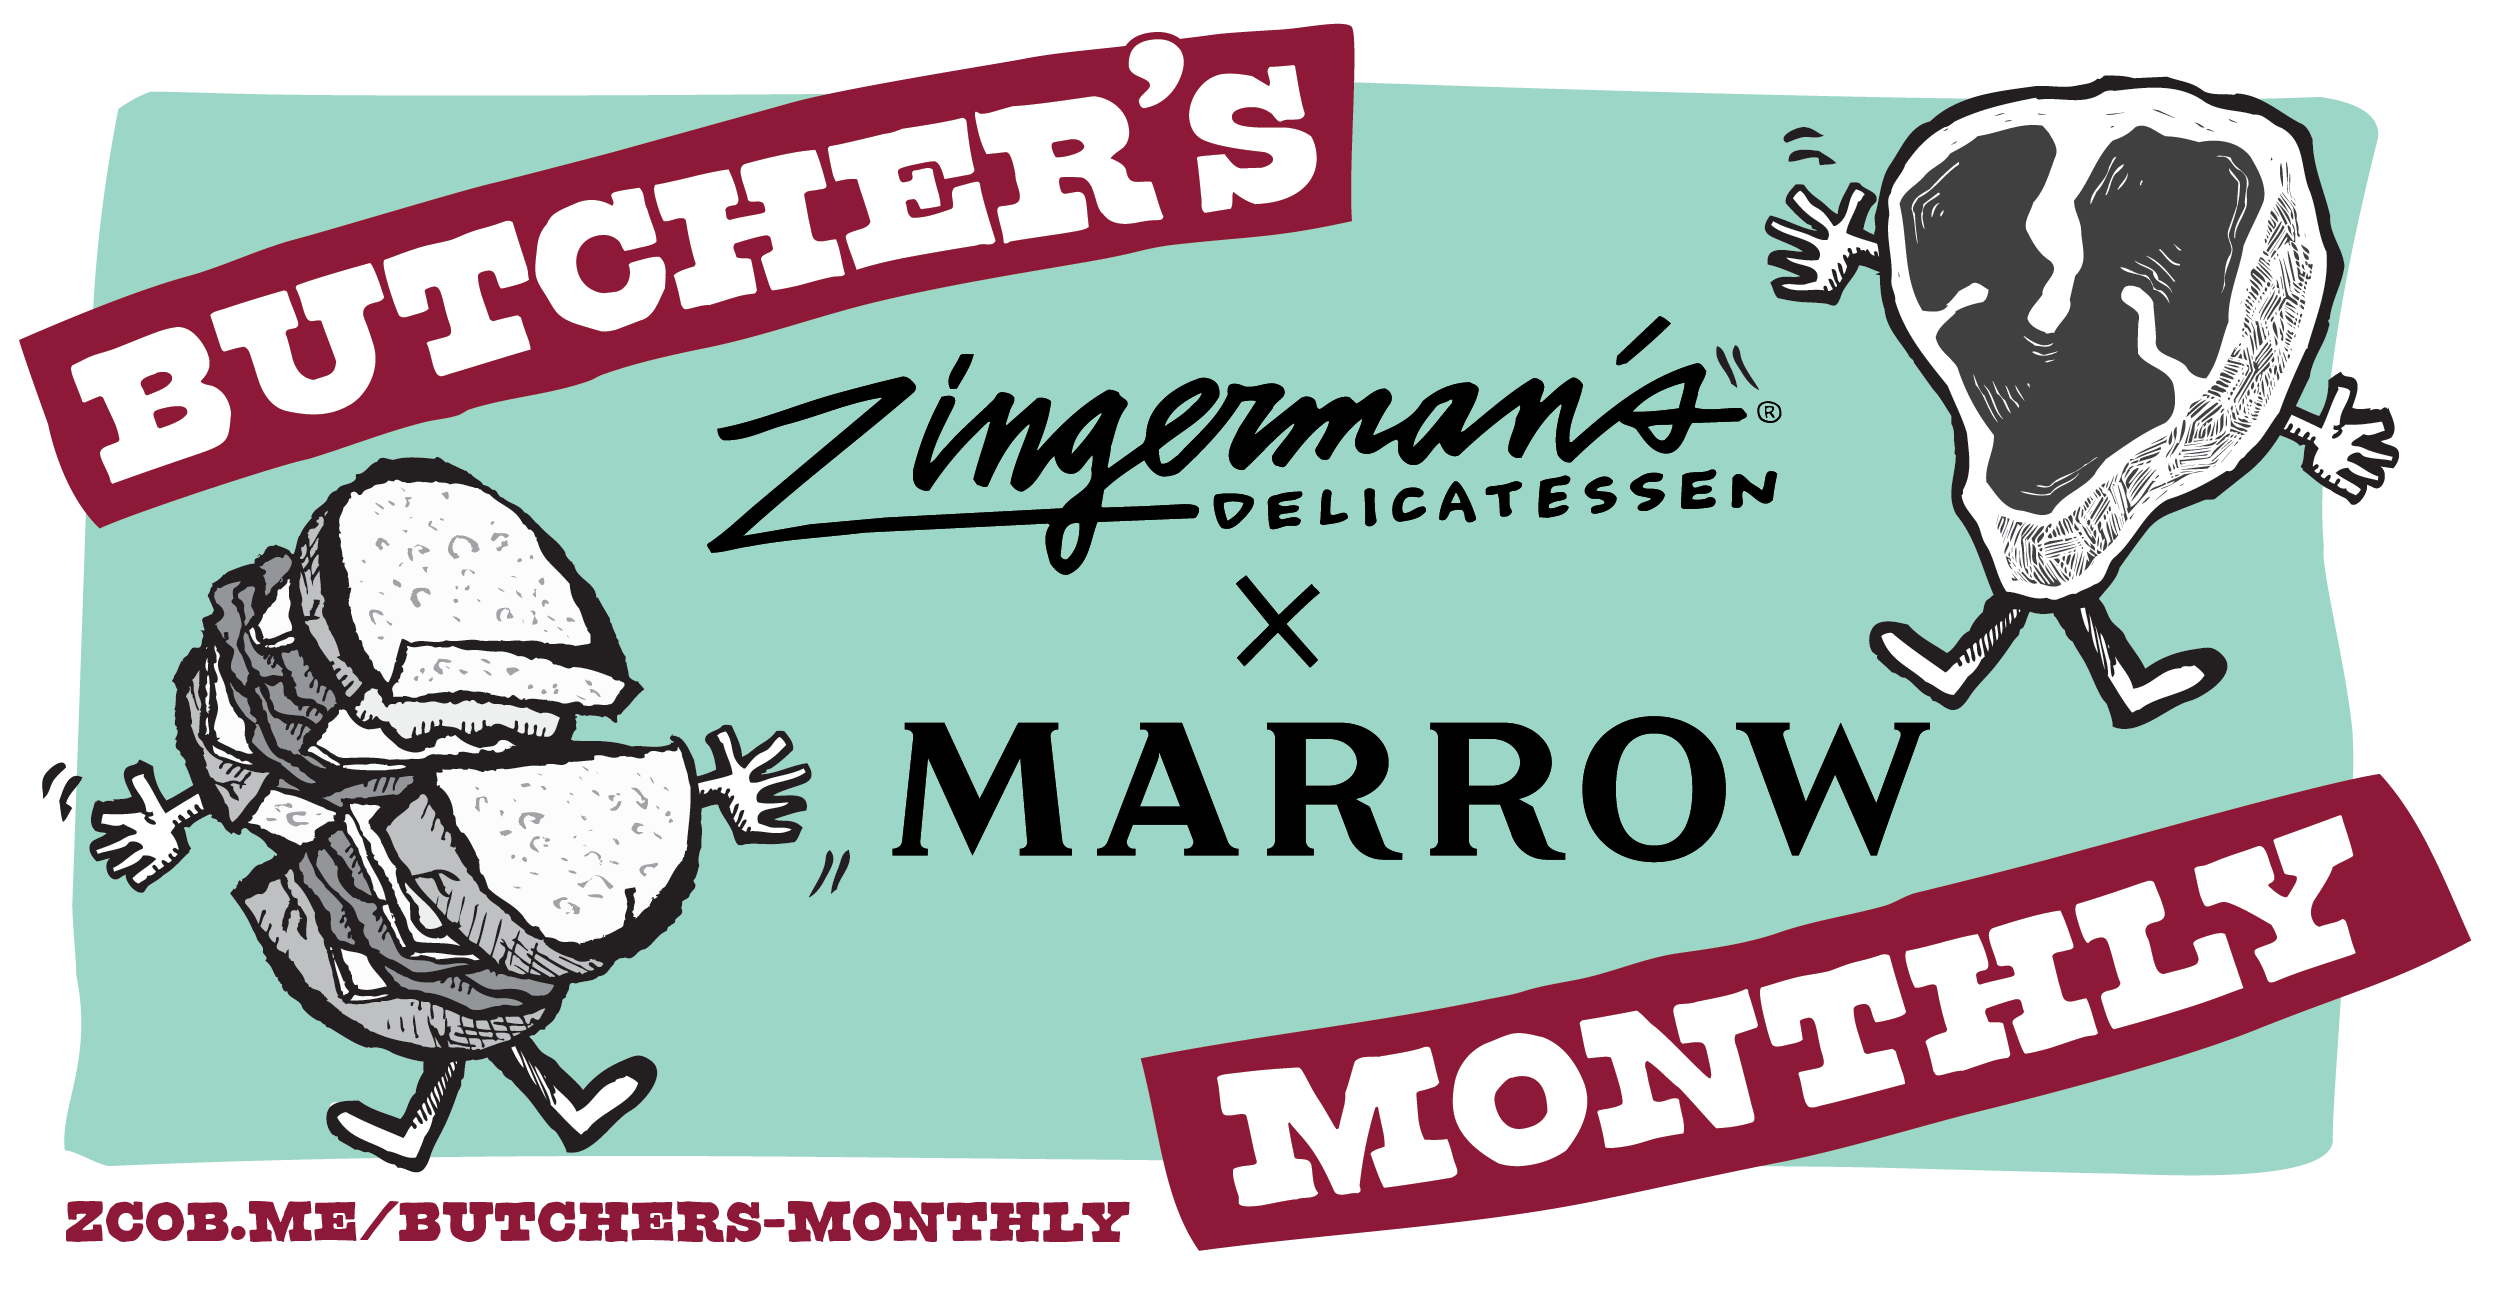 Introducing Butcher's Monthly